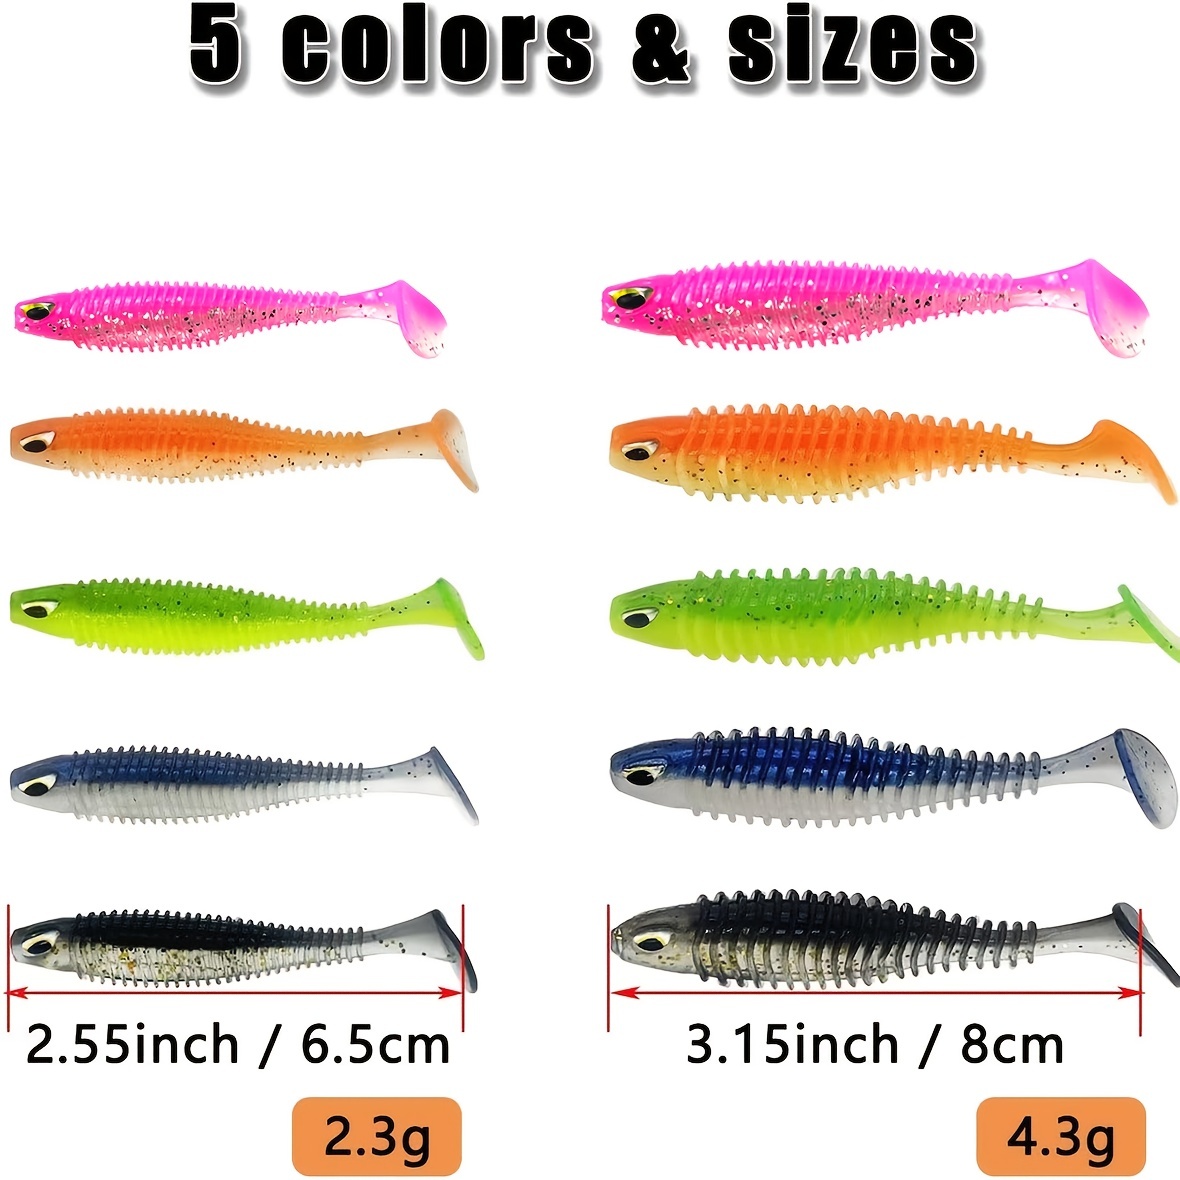 Fishing Lure Set Silicone Shad, Paddle Tail Silicone Lures